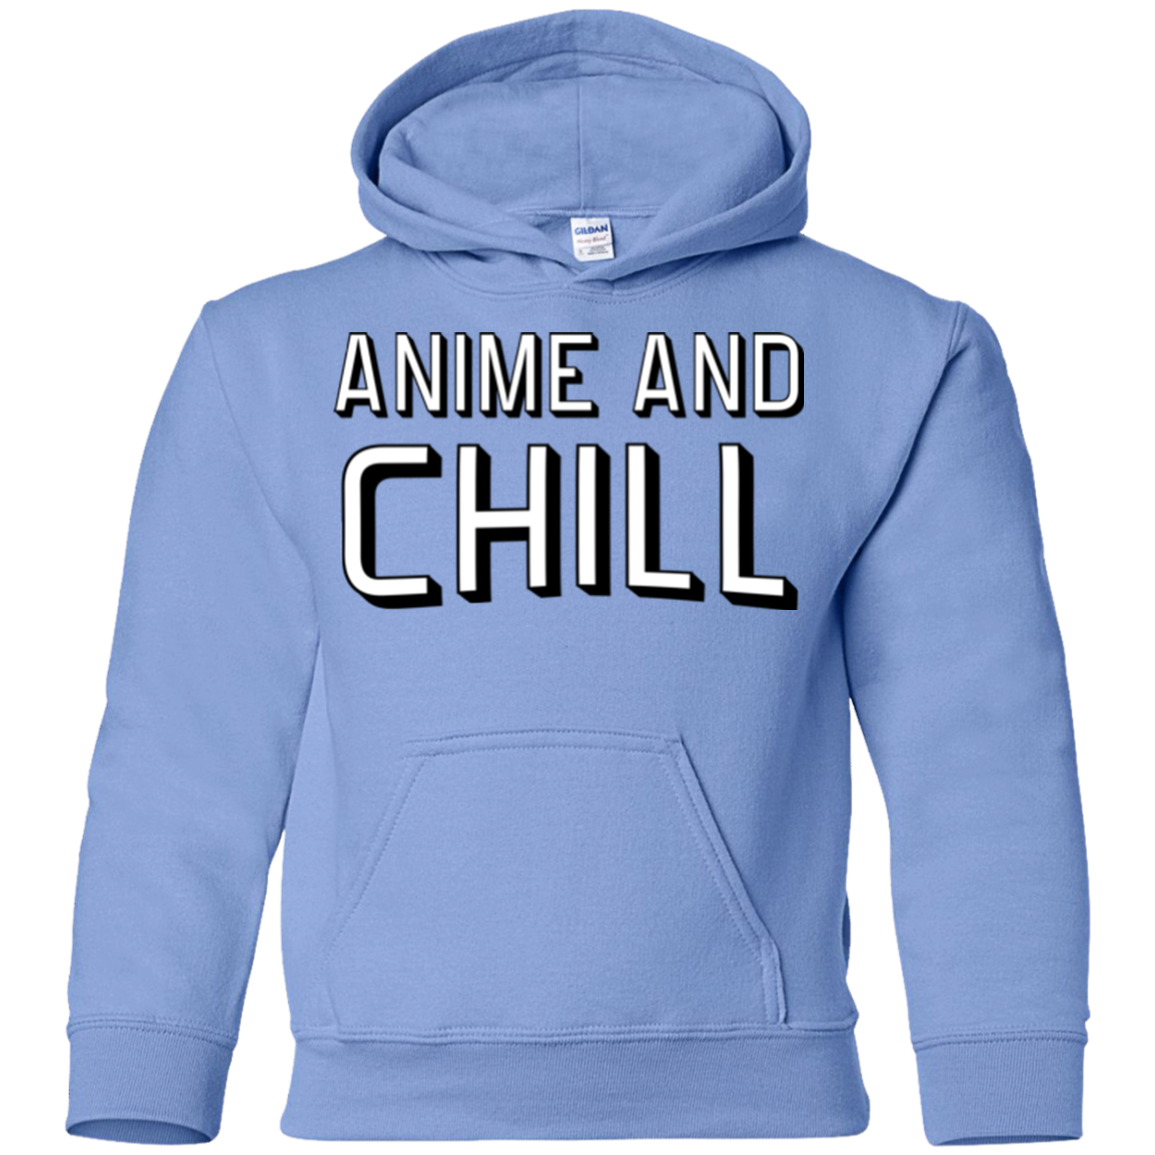 Anime and chill Youth Hoodie